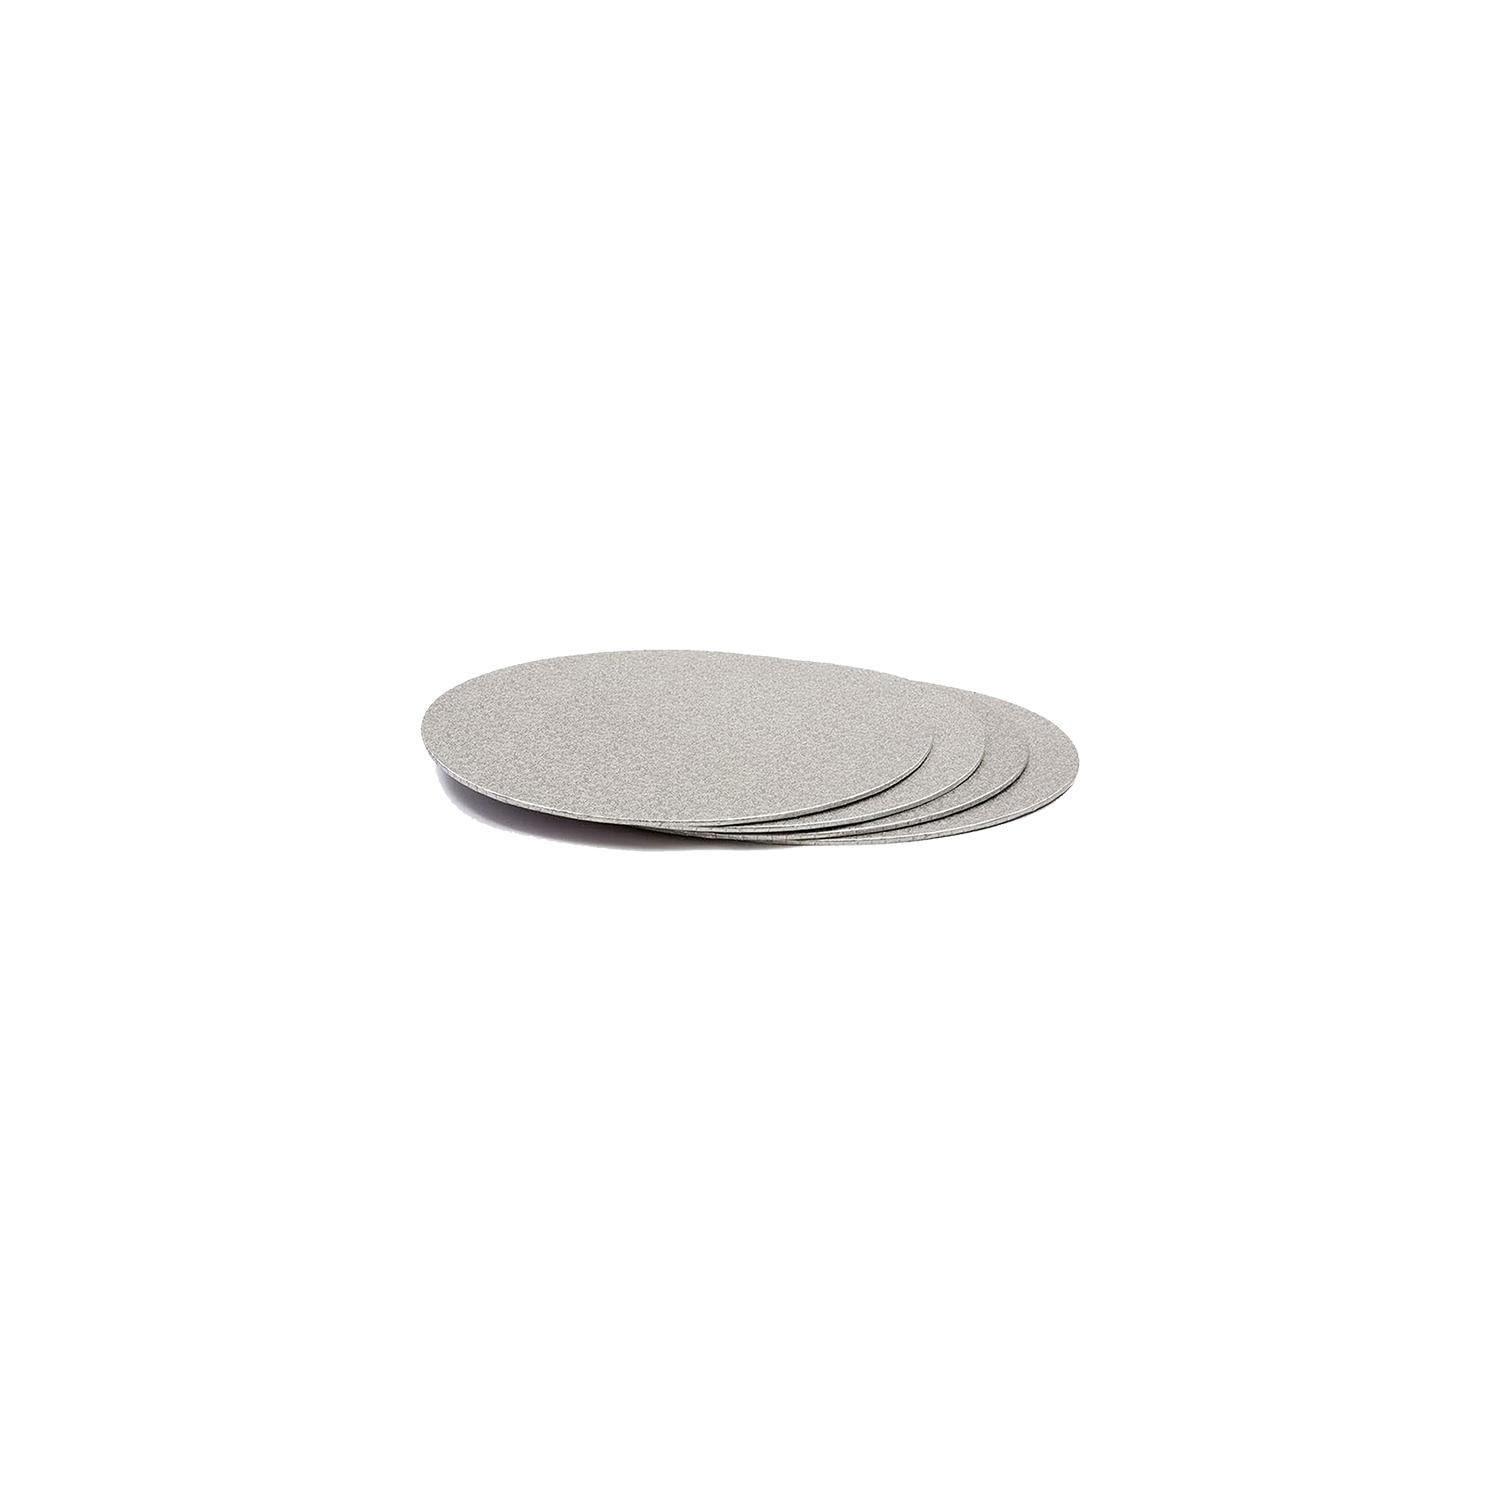 6'' ROUND SMOOTH SILVER CAKE BOARD